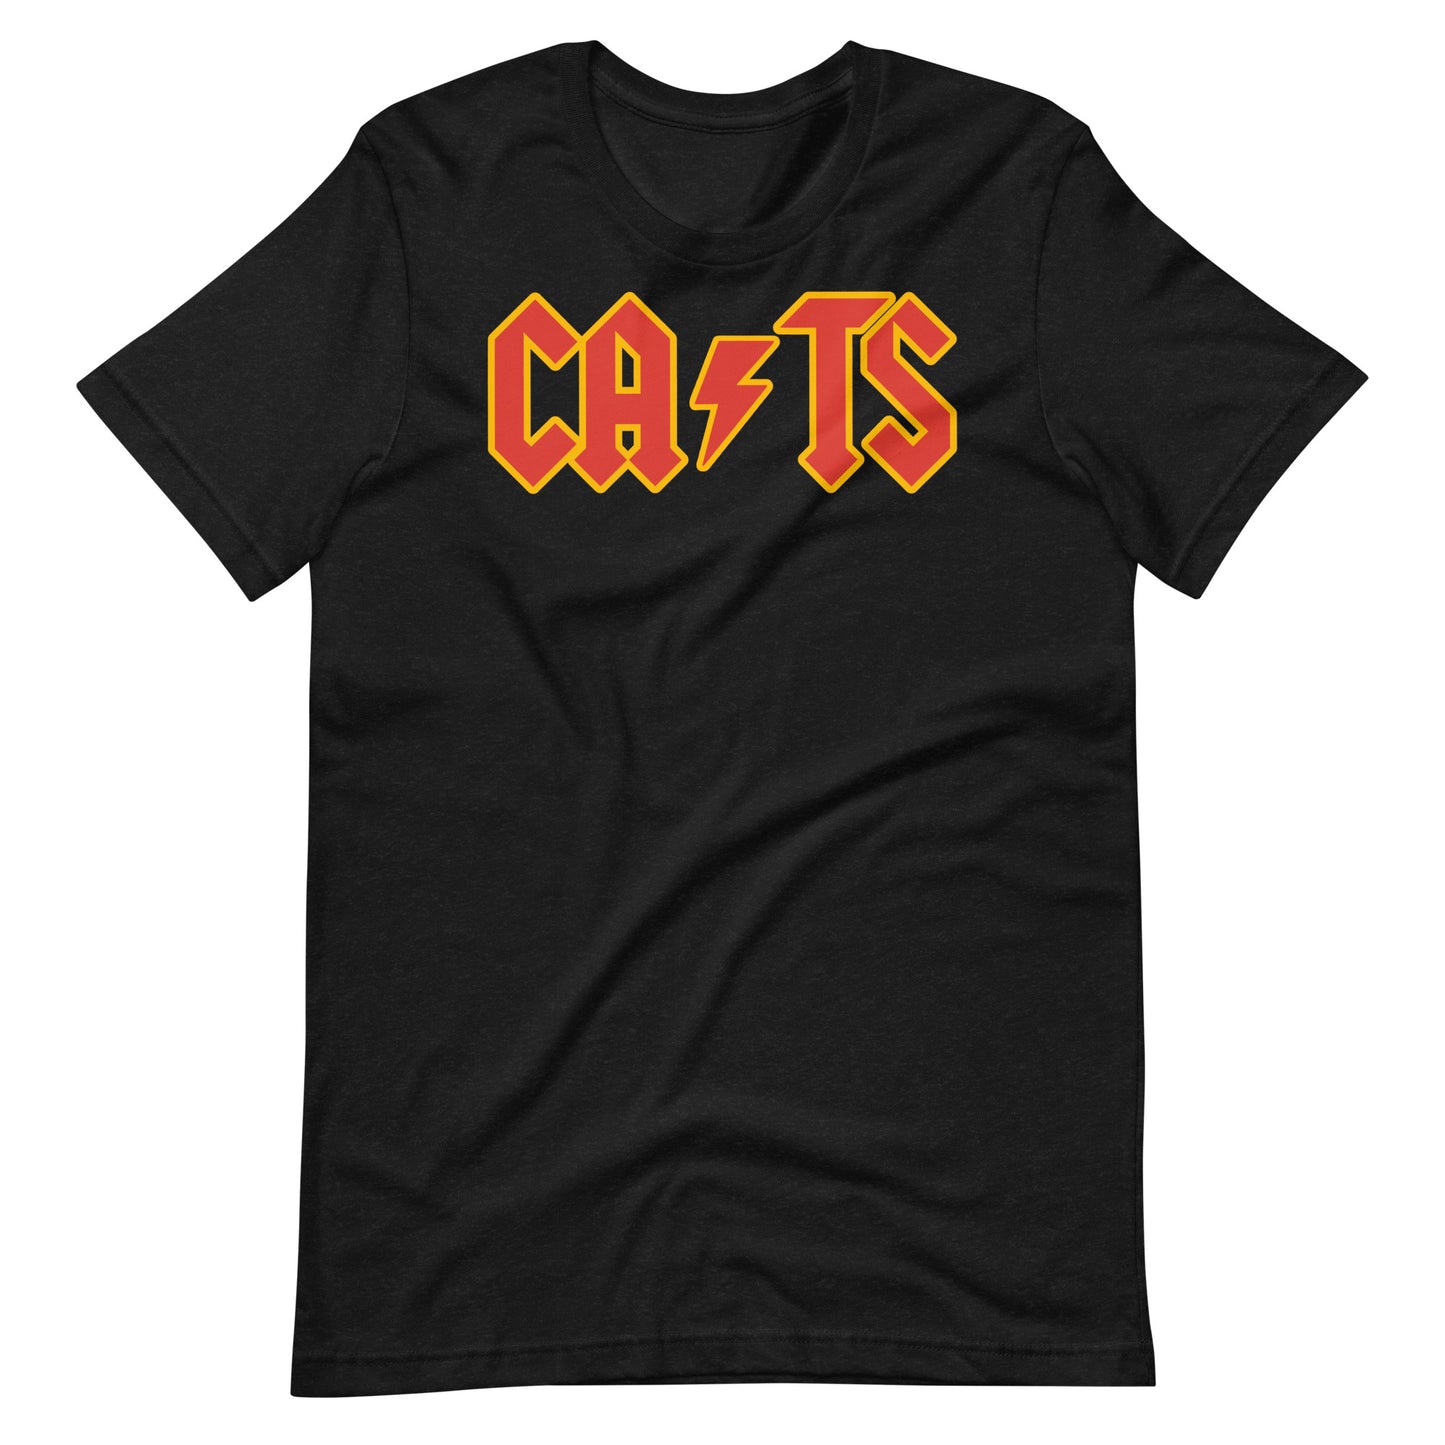 ACDC Cats Unisex T-Shirt